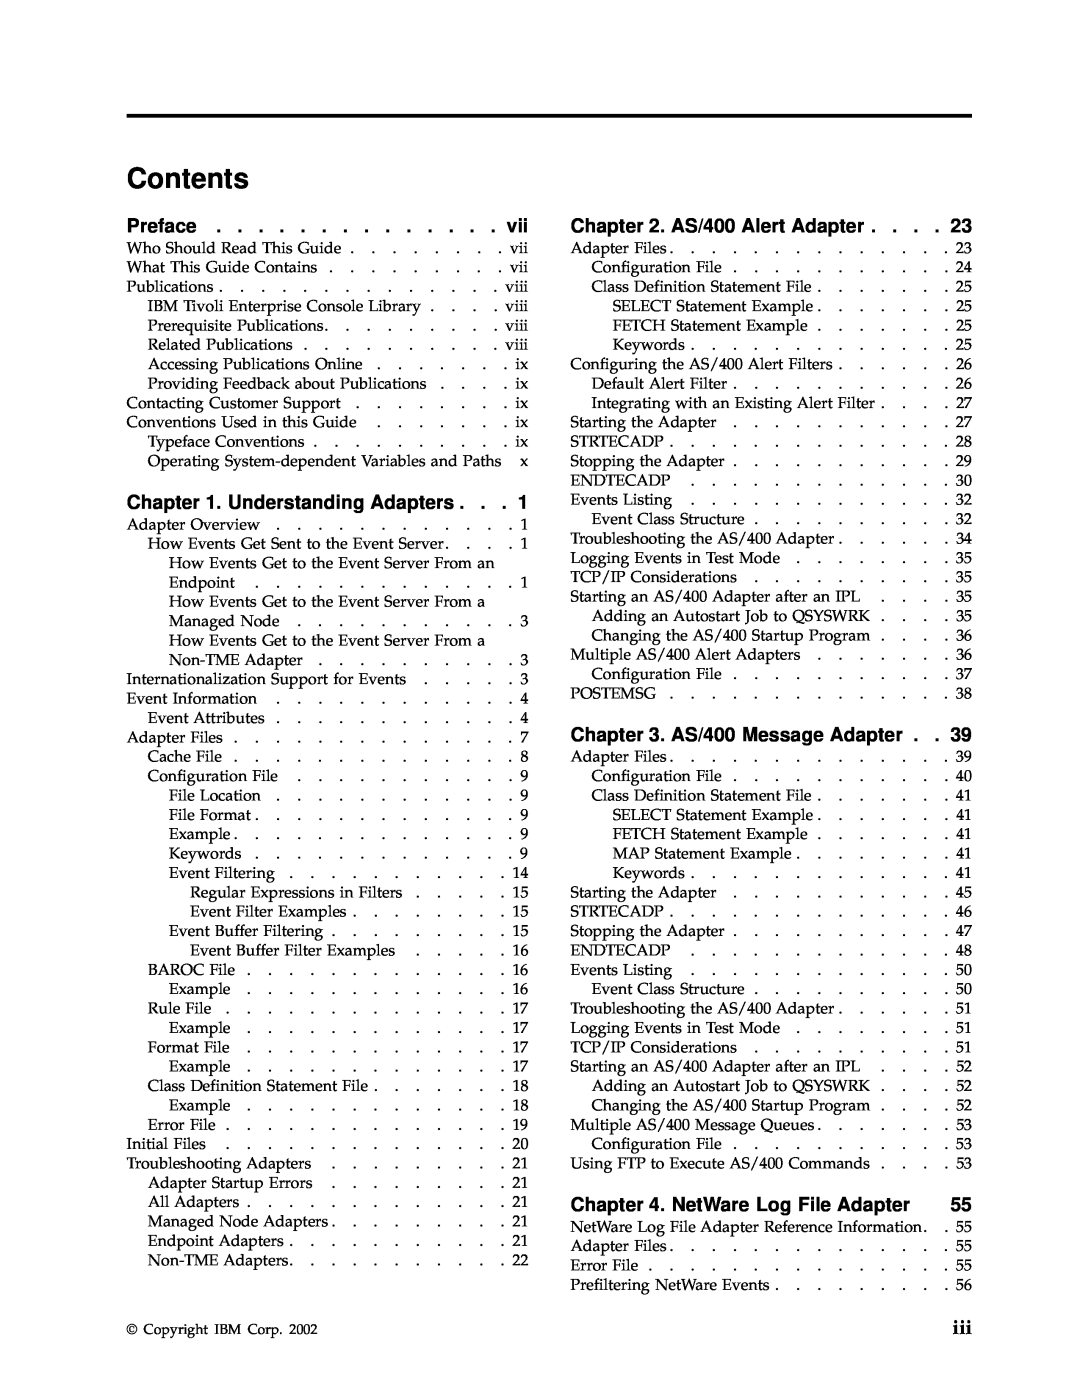 IBM Enterprise Console manual Contents, Preface, AS/400 Alert Adapter, Understanding Adapters, AS/400 Message Adapter 